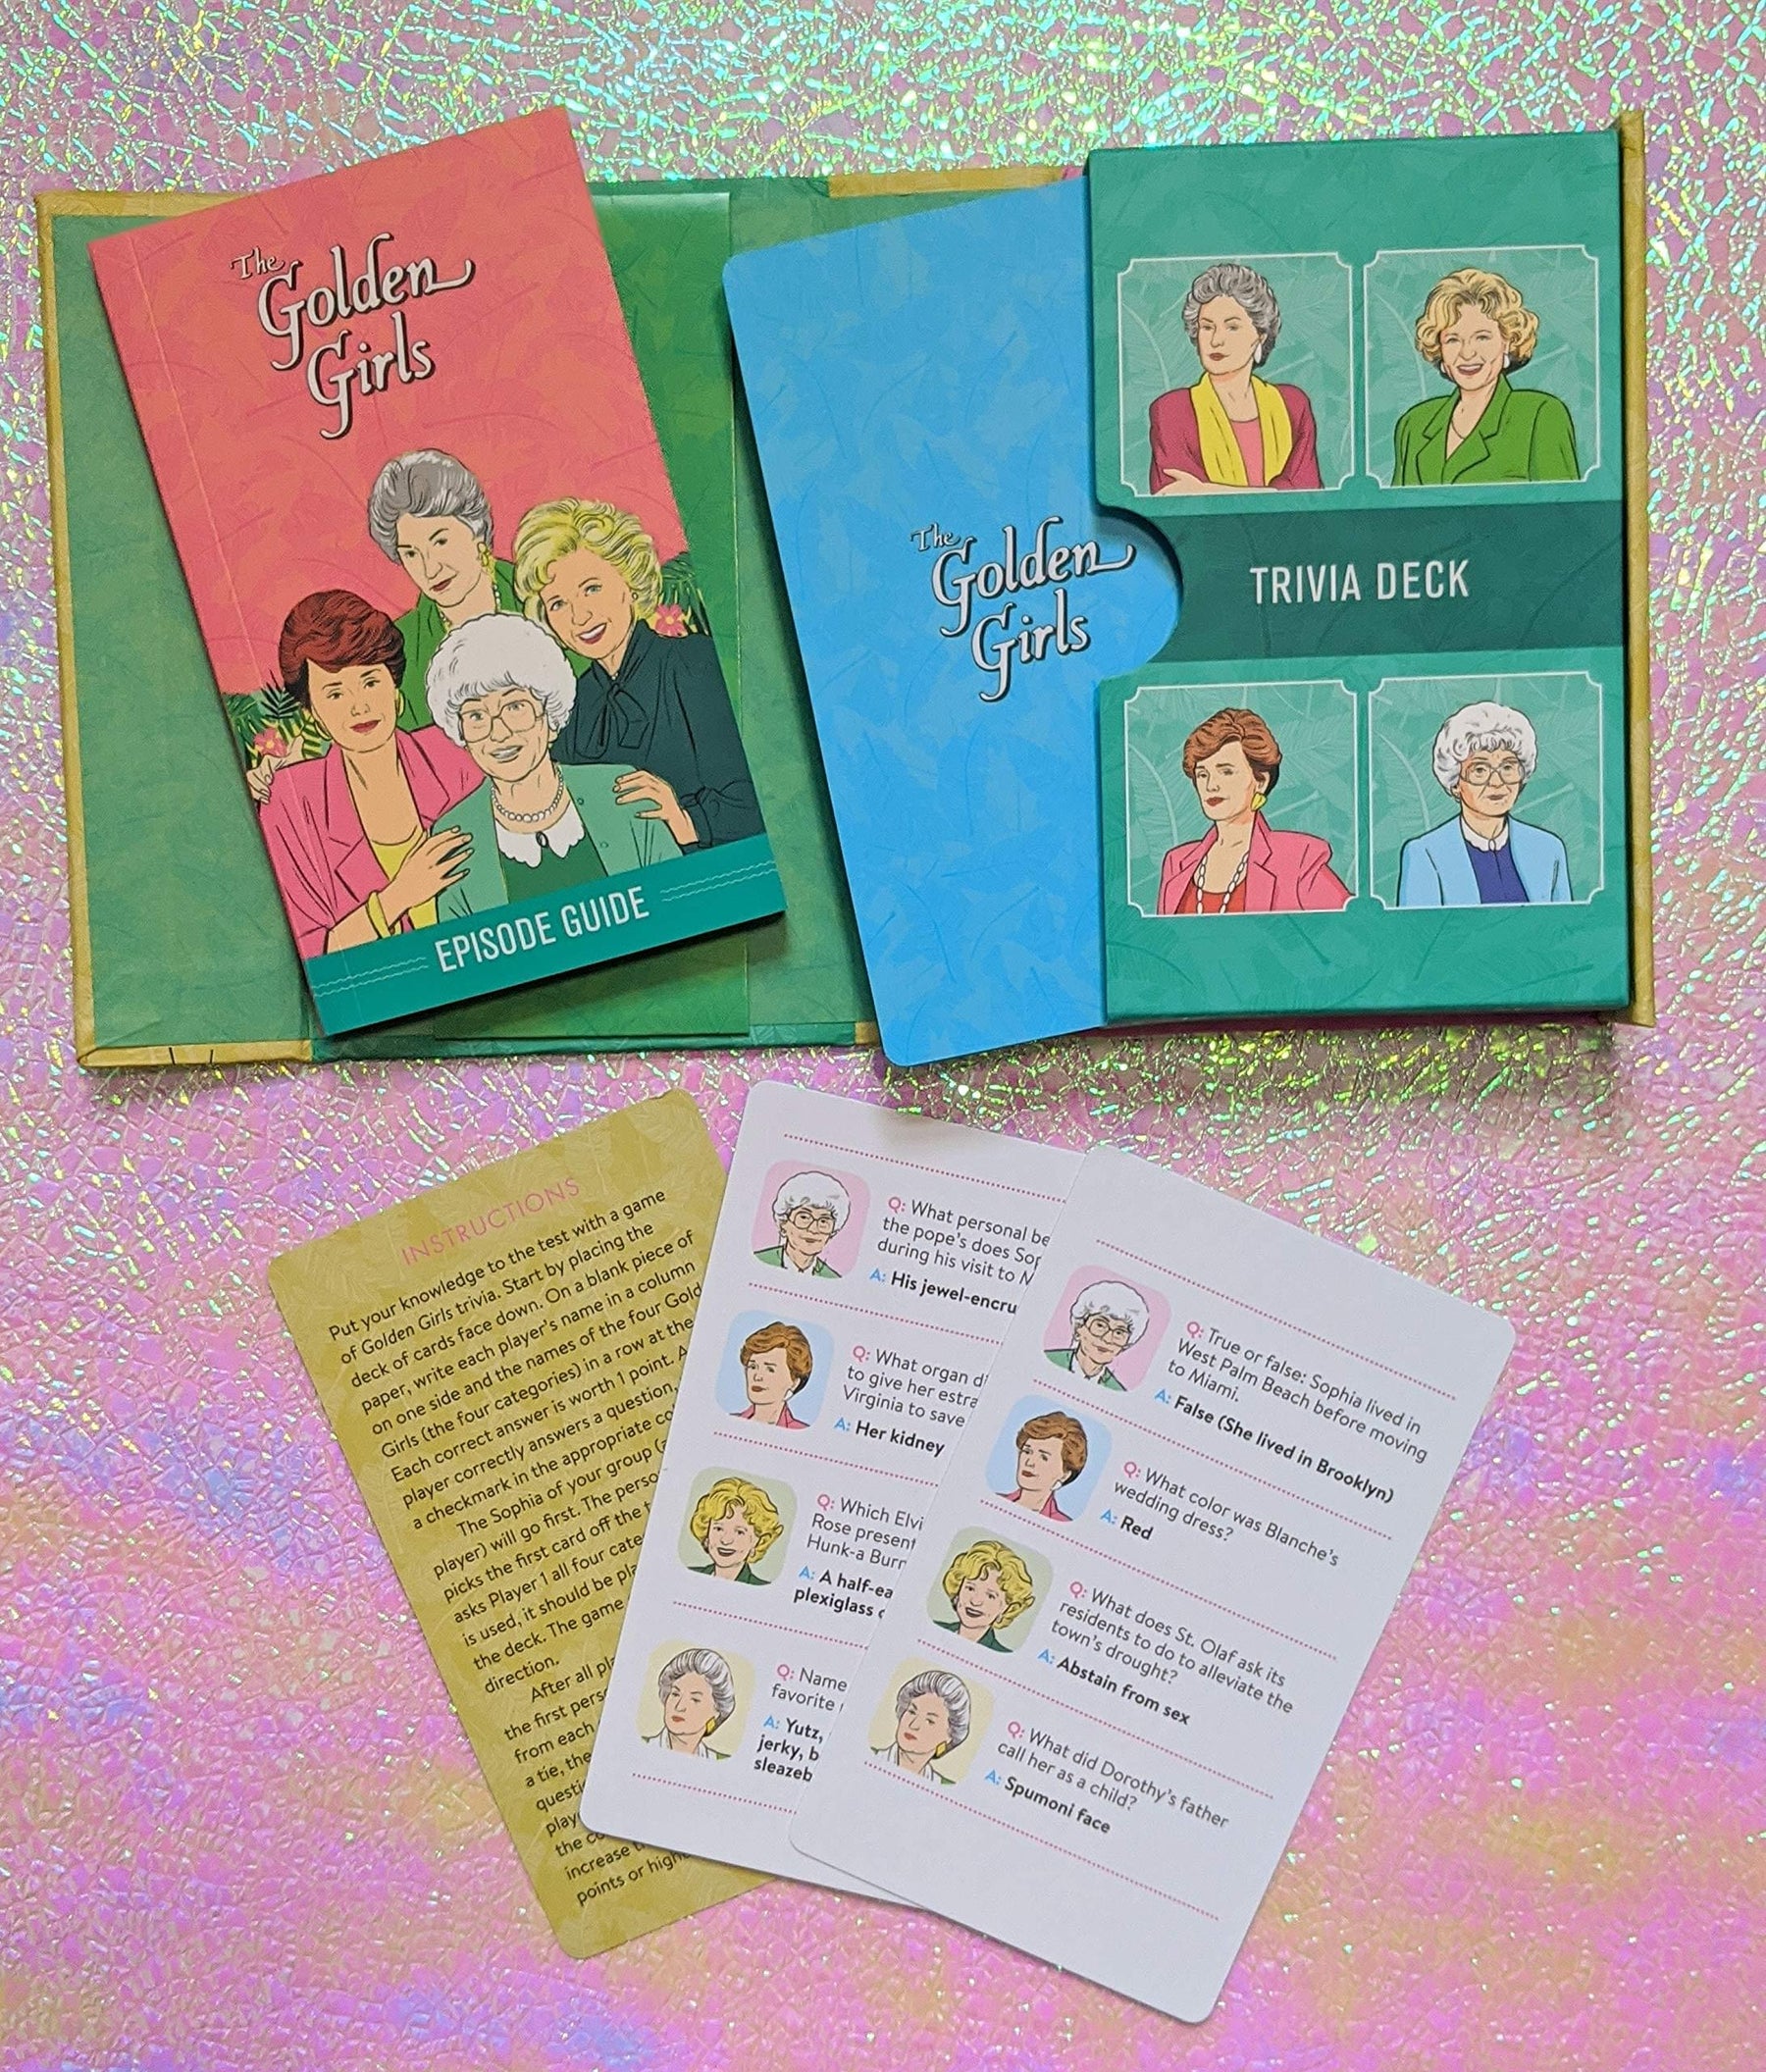 The Golden Girls Trivia Card Deck and Episode Guide